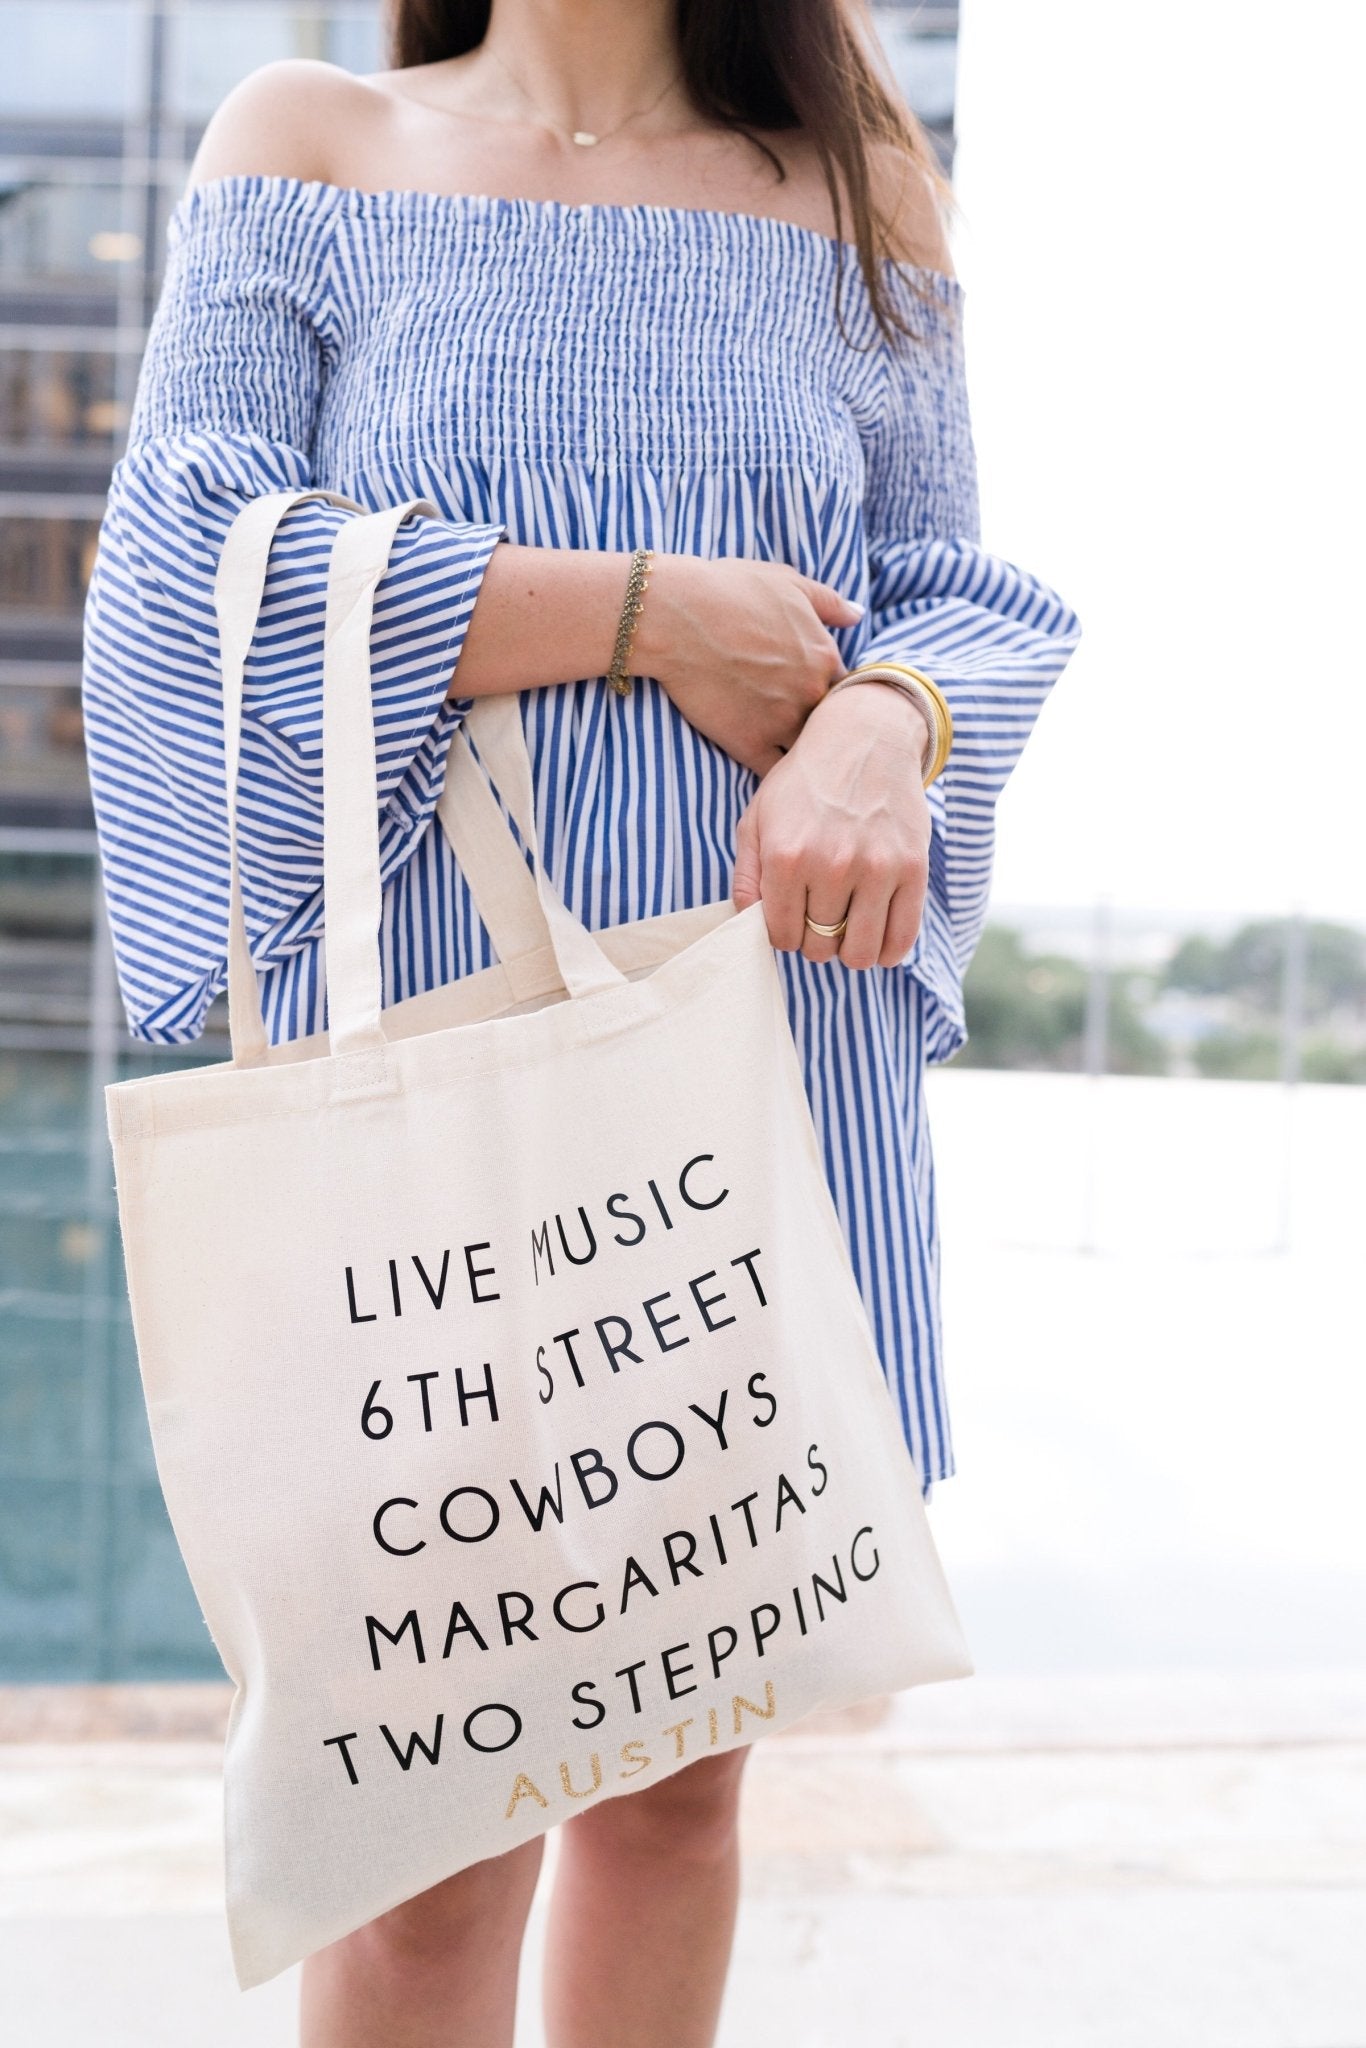 A customized tote themed for Austin, Texas